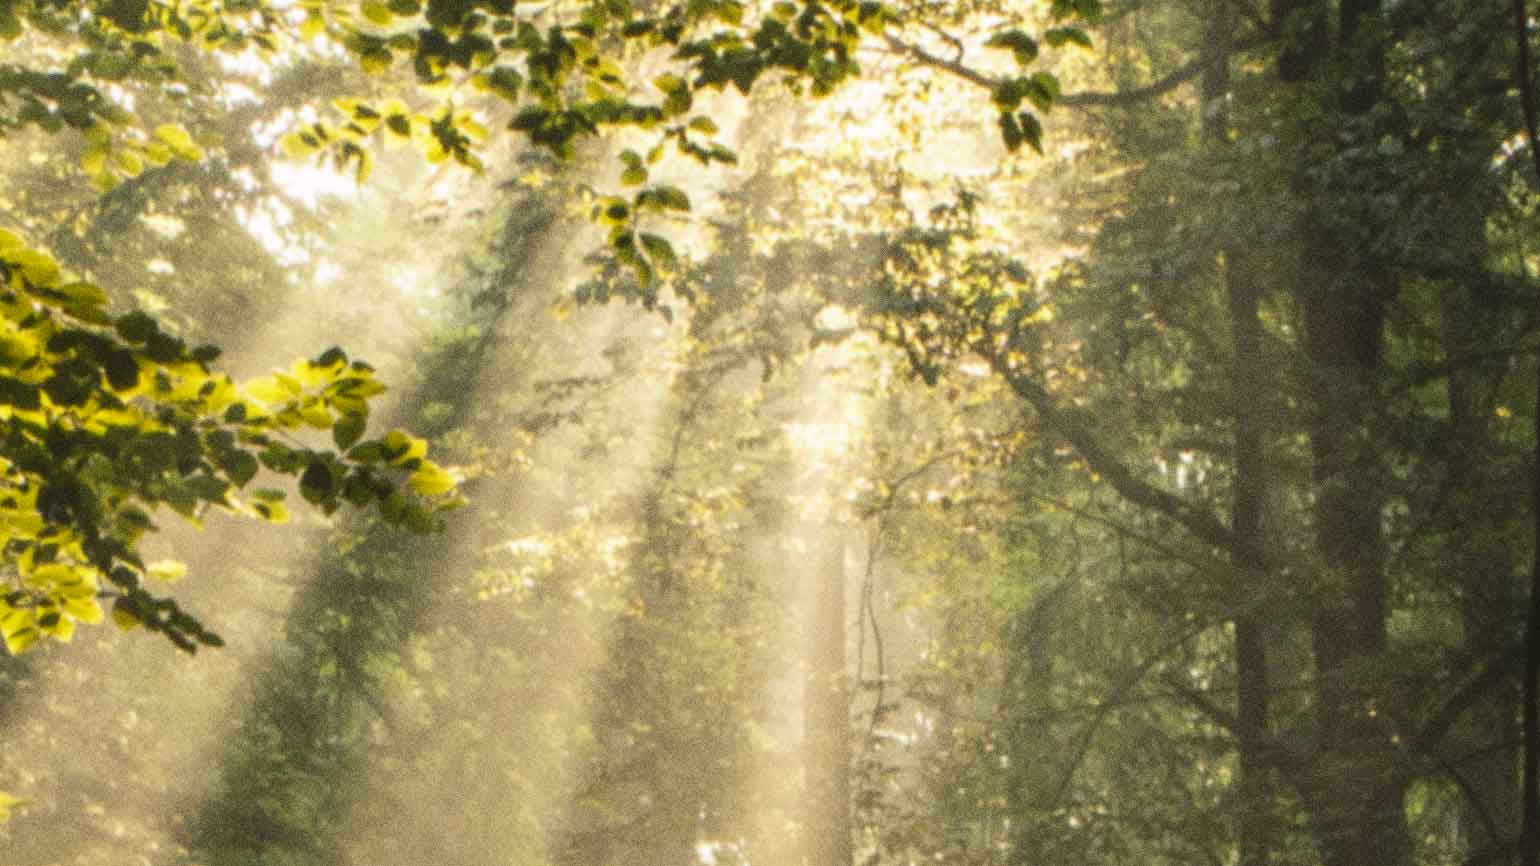 Sunlight shining through trees showing how living an abundant life can give you a brighter perspective.